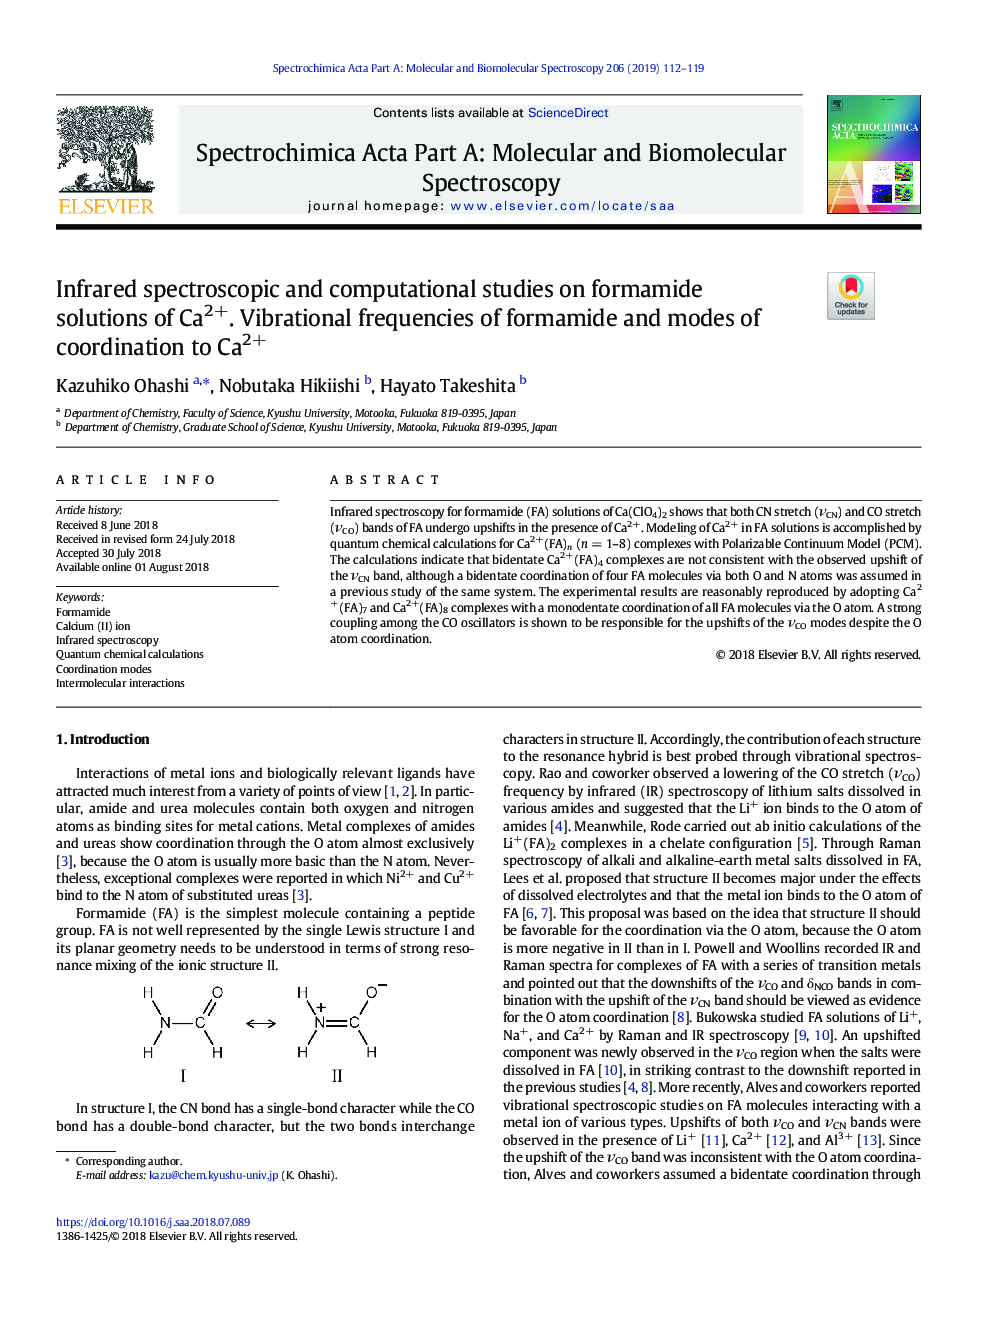 Infrared spectroscopic and computational studies on formamide solutions of Ca2+. Vibrational frequencies of formamide and modes of coordination to Ca2+